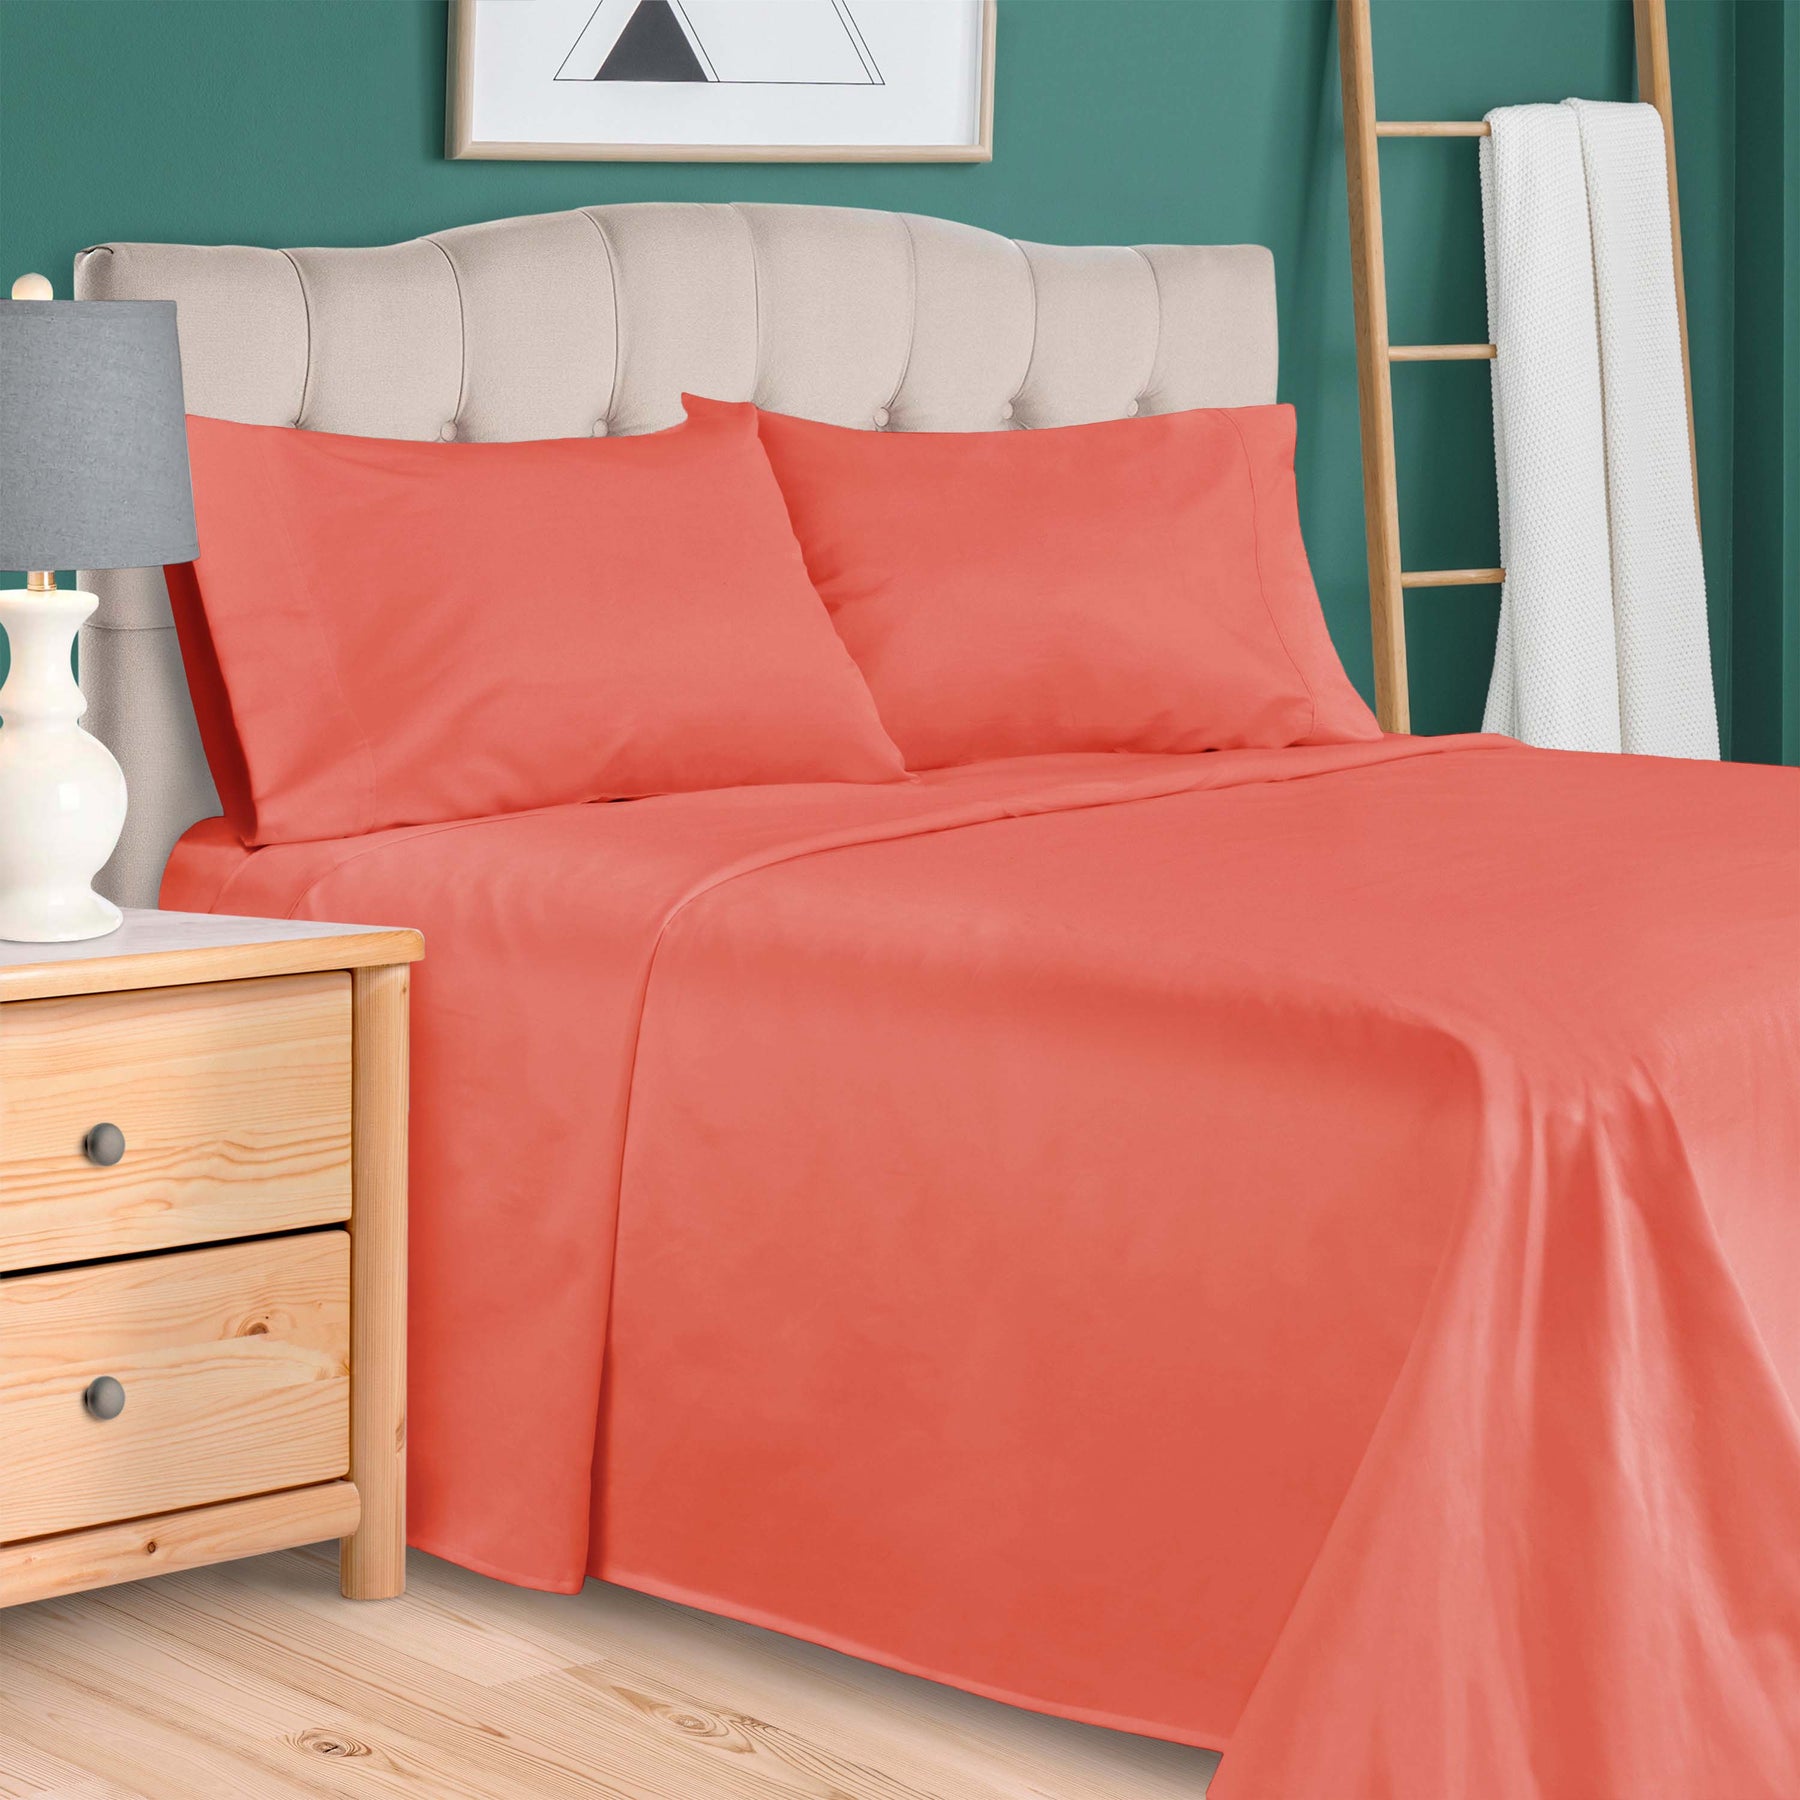 Superior Egyptian Cotton 300 Thread Count Solid Deep Pocket Bed Sheet Set - Coral